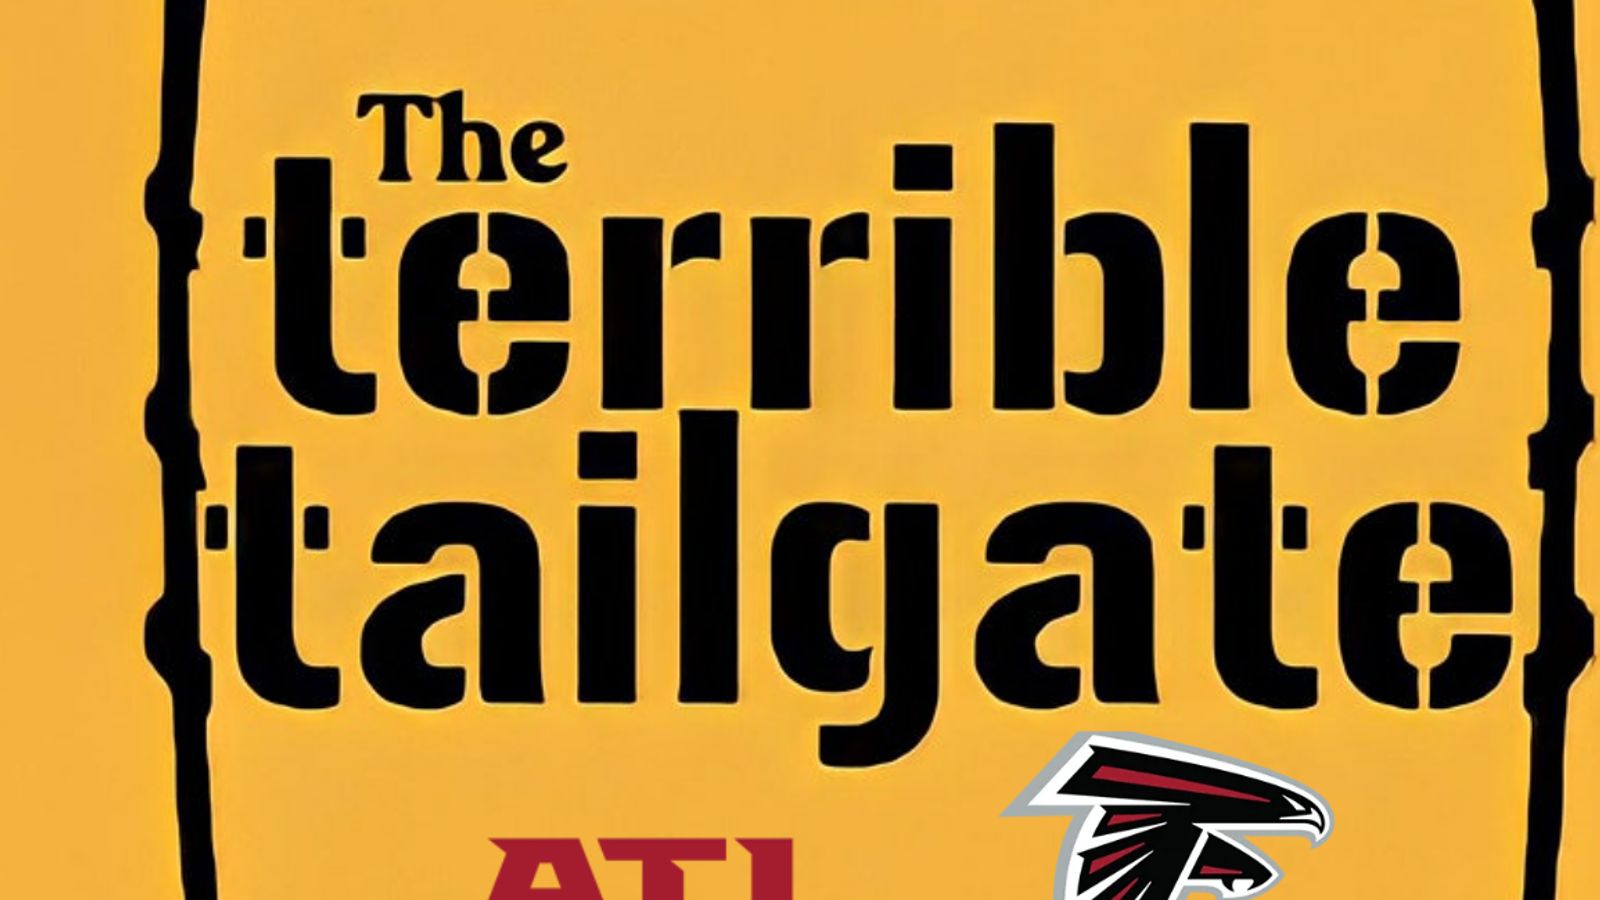 Steelers/Falcons Terrible Tailgate + Game Ticket Sale